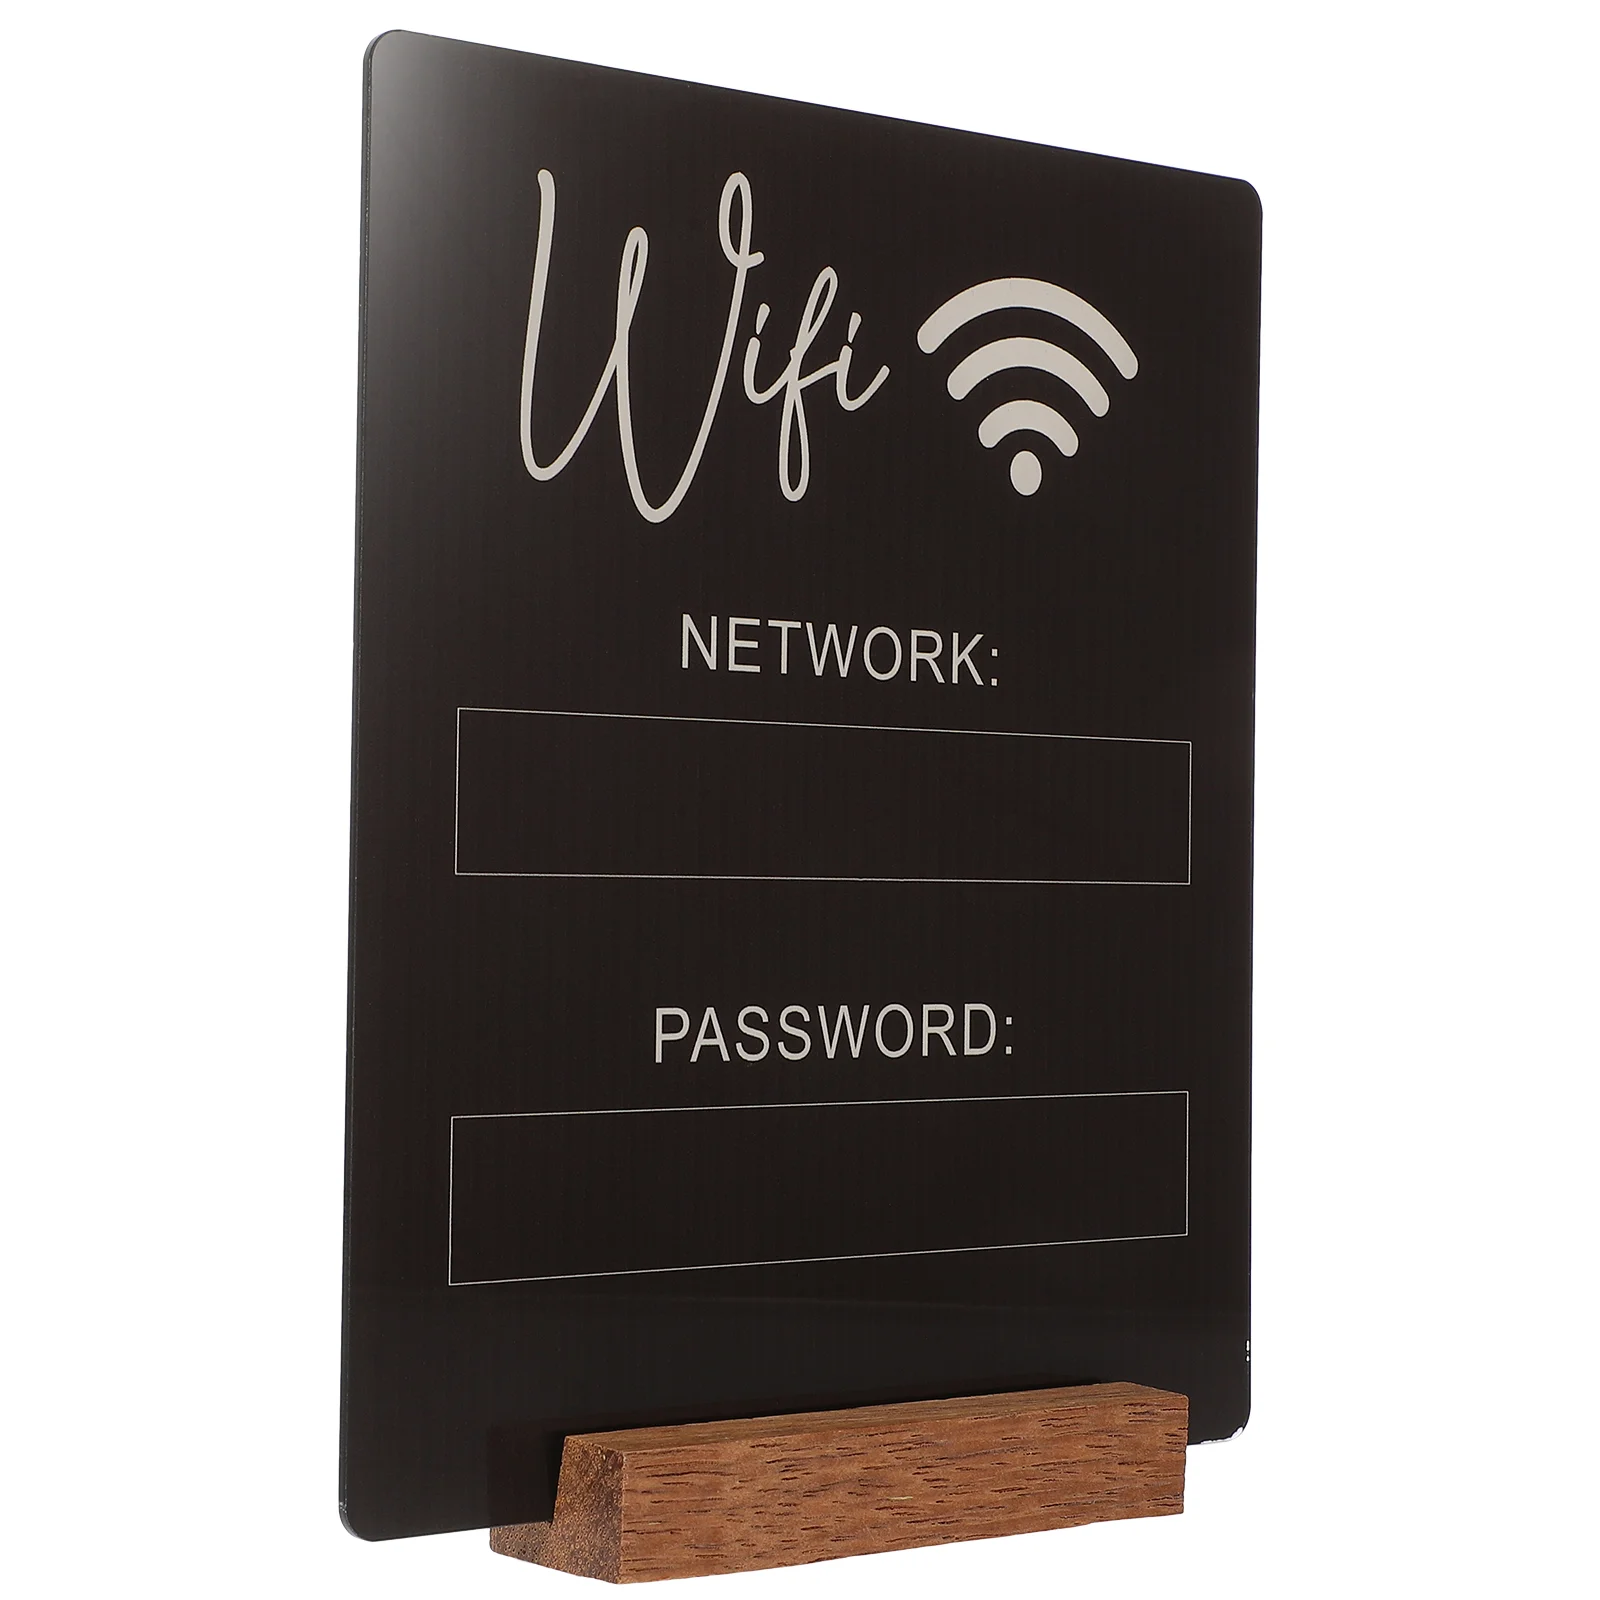 

Acrylic WiFi Sign Board Table Wifi Password Sign Table WiFi Sign for Home Hotel Restaurant